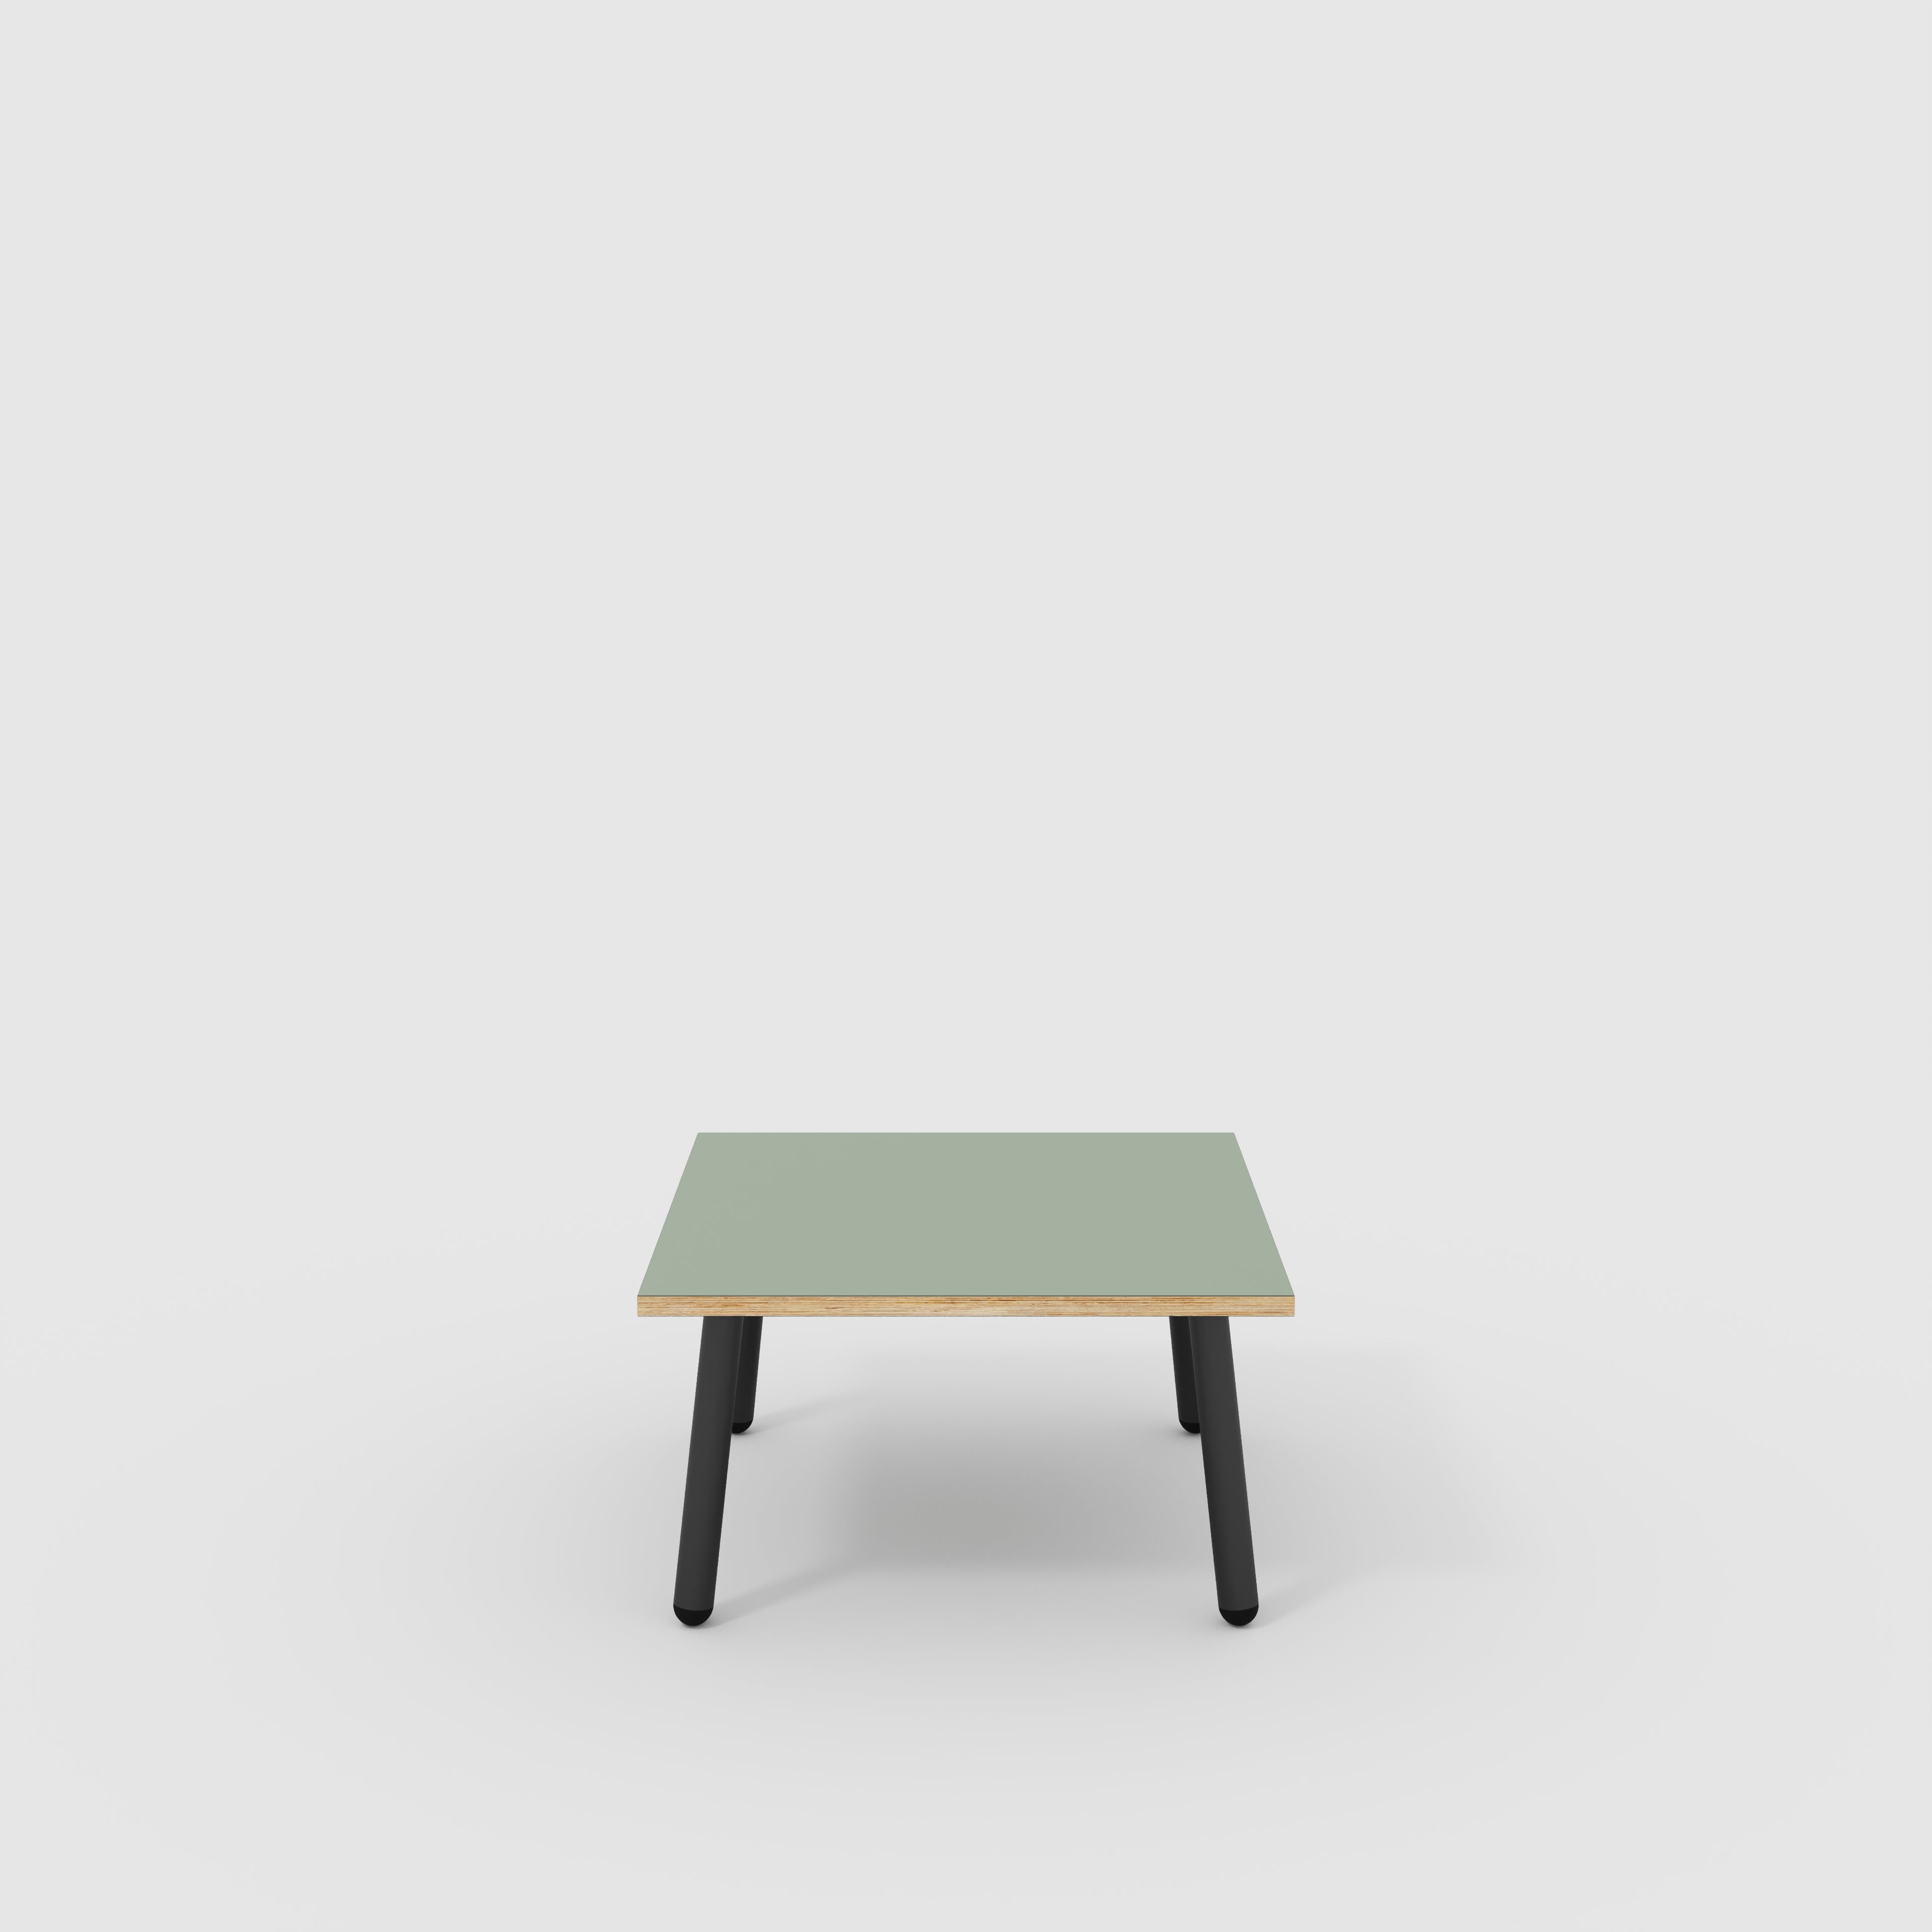 Coffee Table with Black Round Single Pin Legs - Formica Green Slate - 800(w) x 800(d) x 425(h)